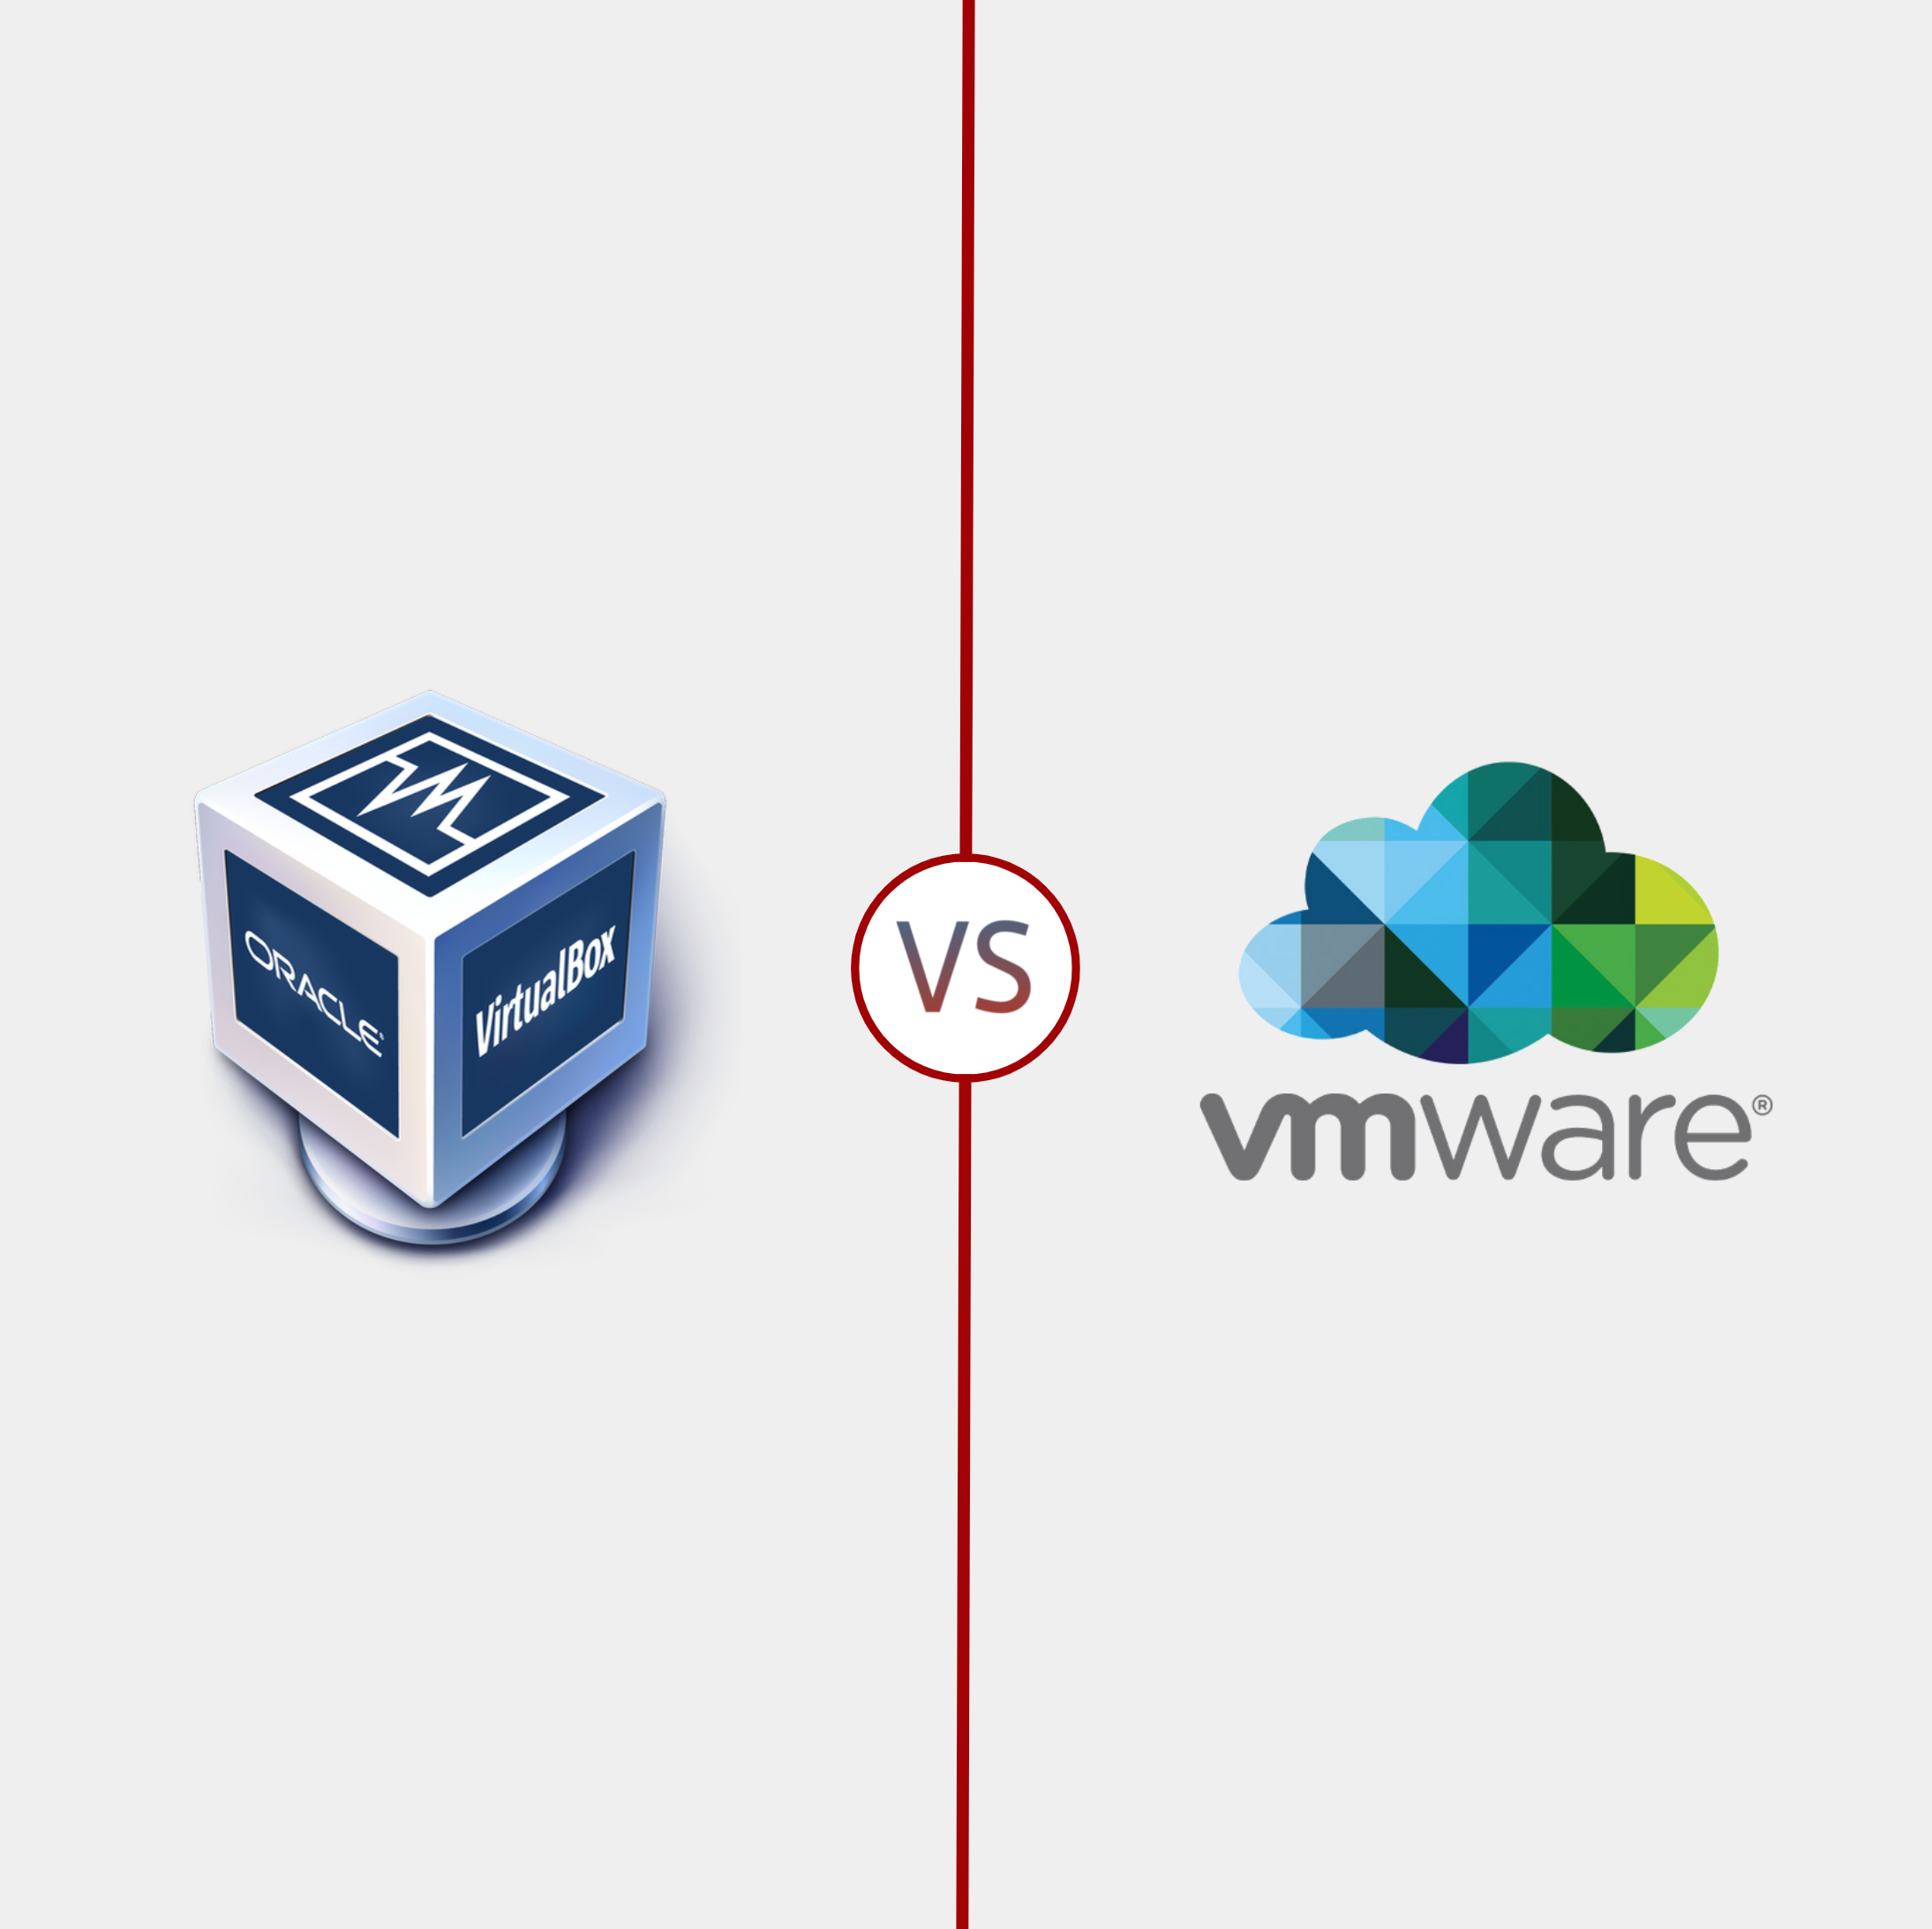 A graphic image showing the logos for Oracle VM VirtualBox and VMware vSphere as this article compares the two top virtualization tools.